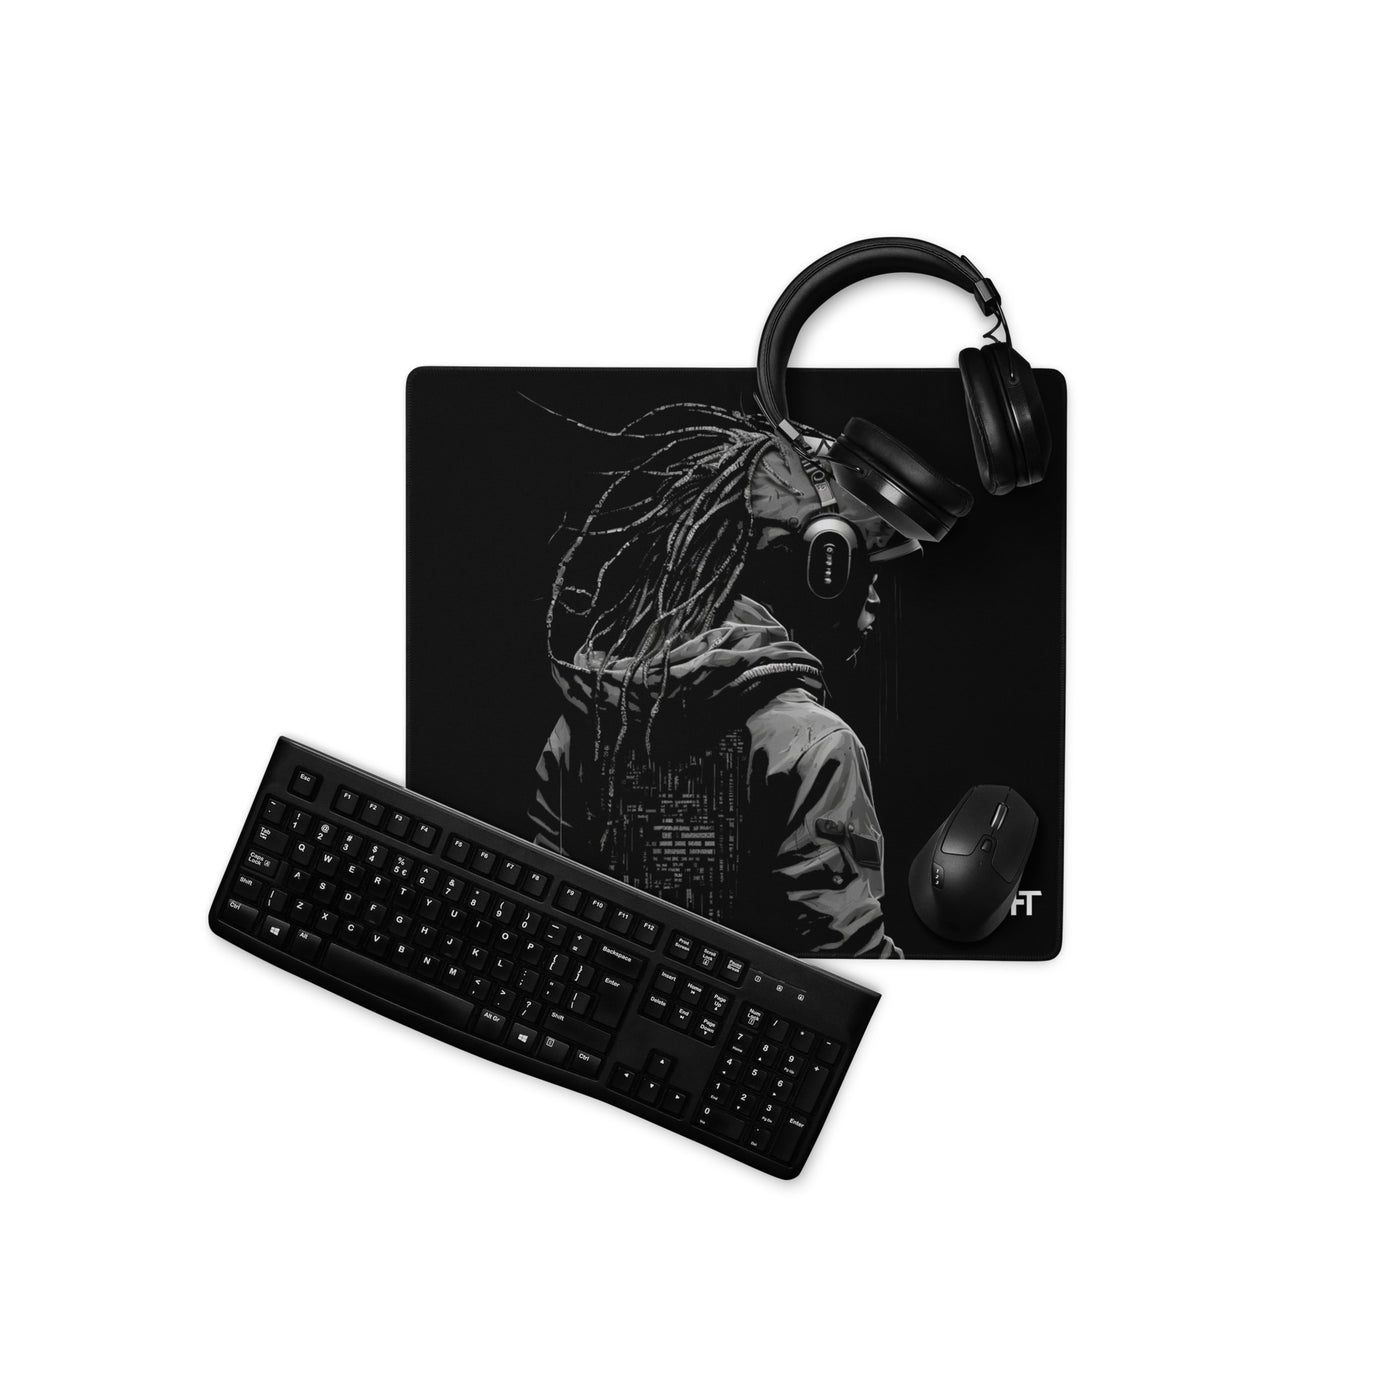 Cyberware assassin v40 - Gaming mouse pad